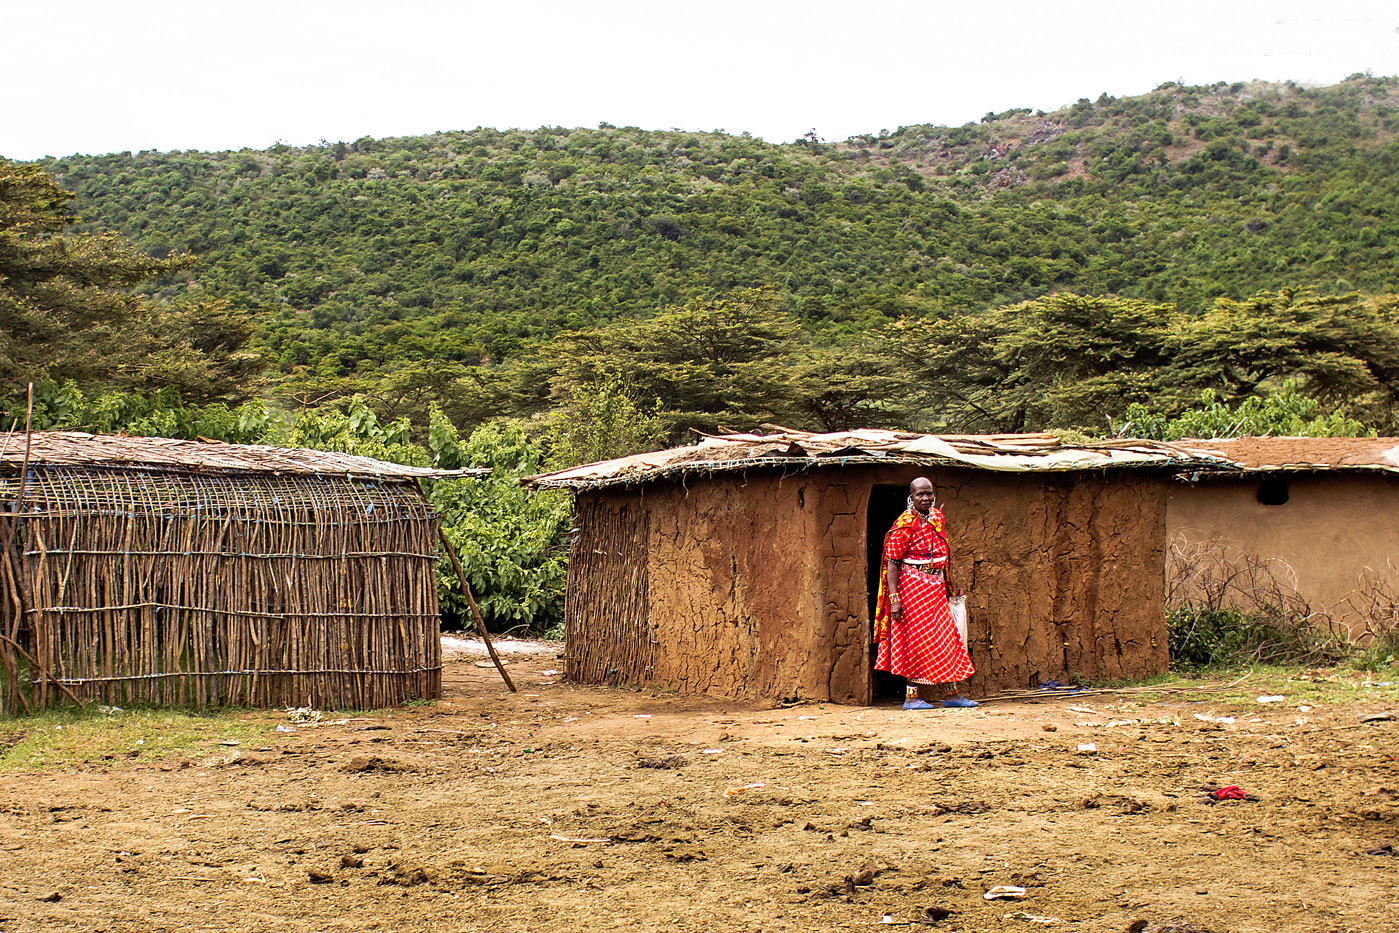 Maasai women in front of a traditional house